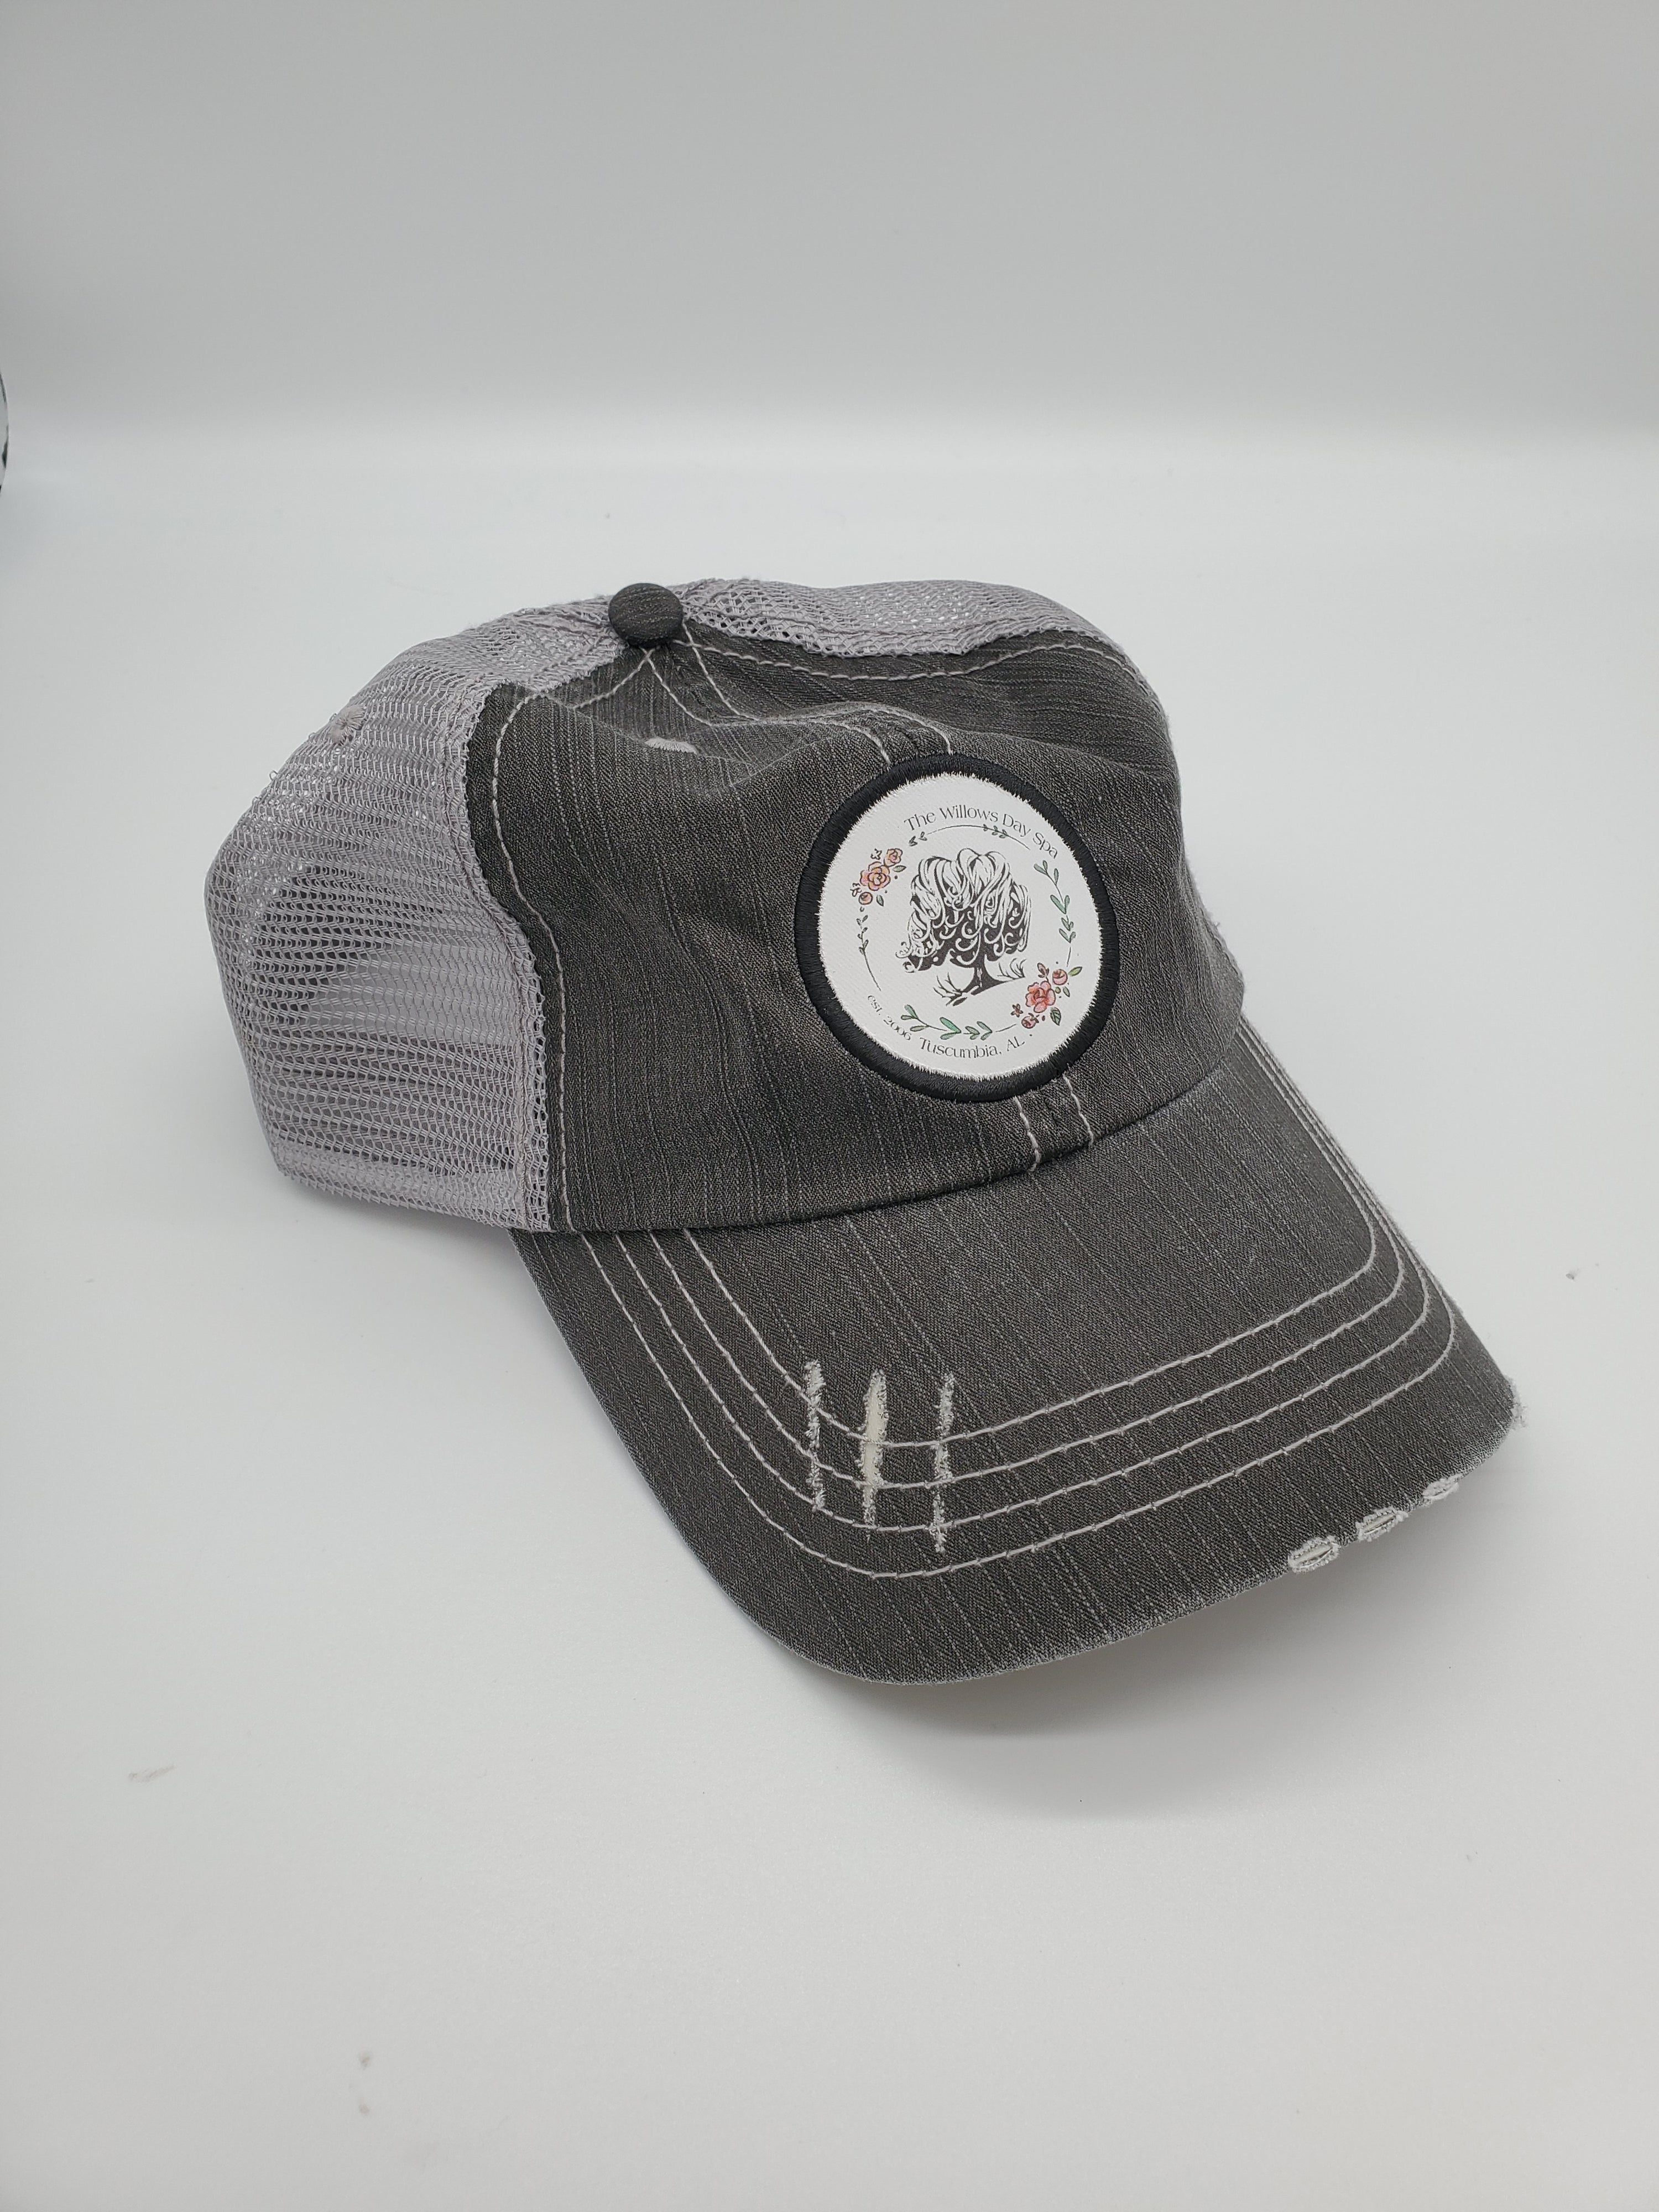 The Willows Day Spa distressed trucker hat